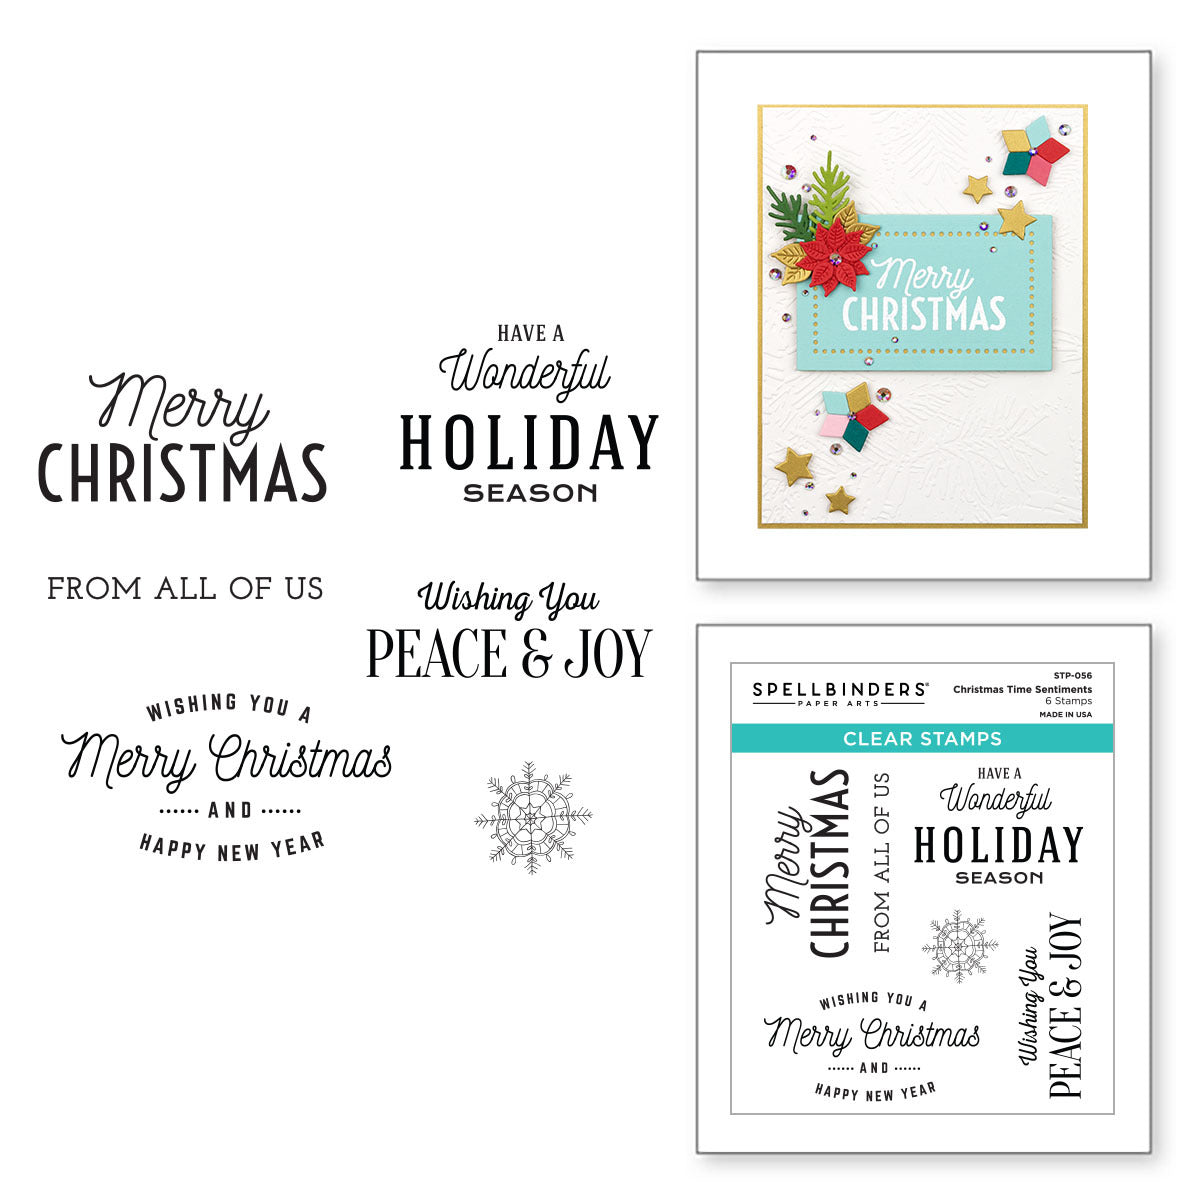 Christmas Time Sentiments Clear Stamp Set From The Christmas Tradition 